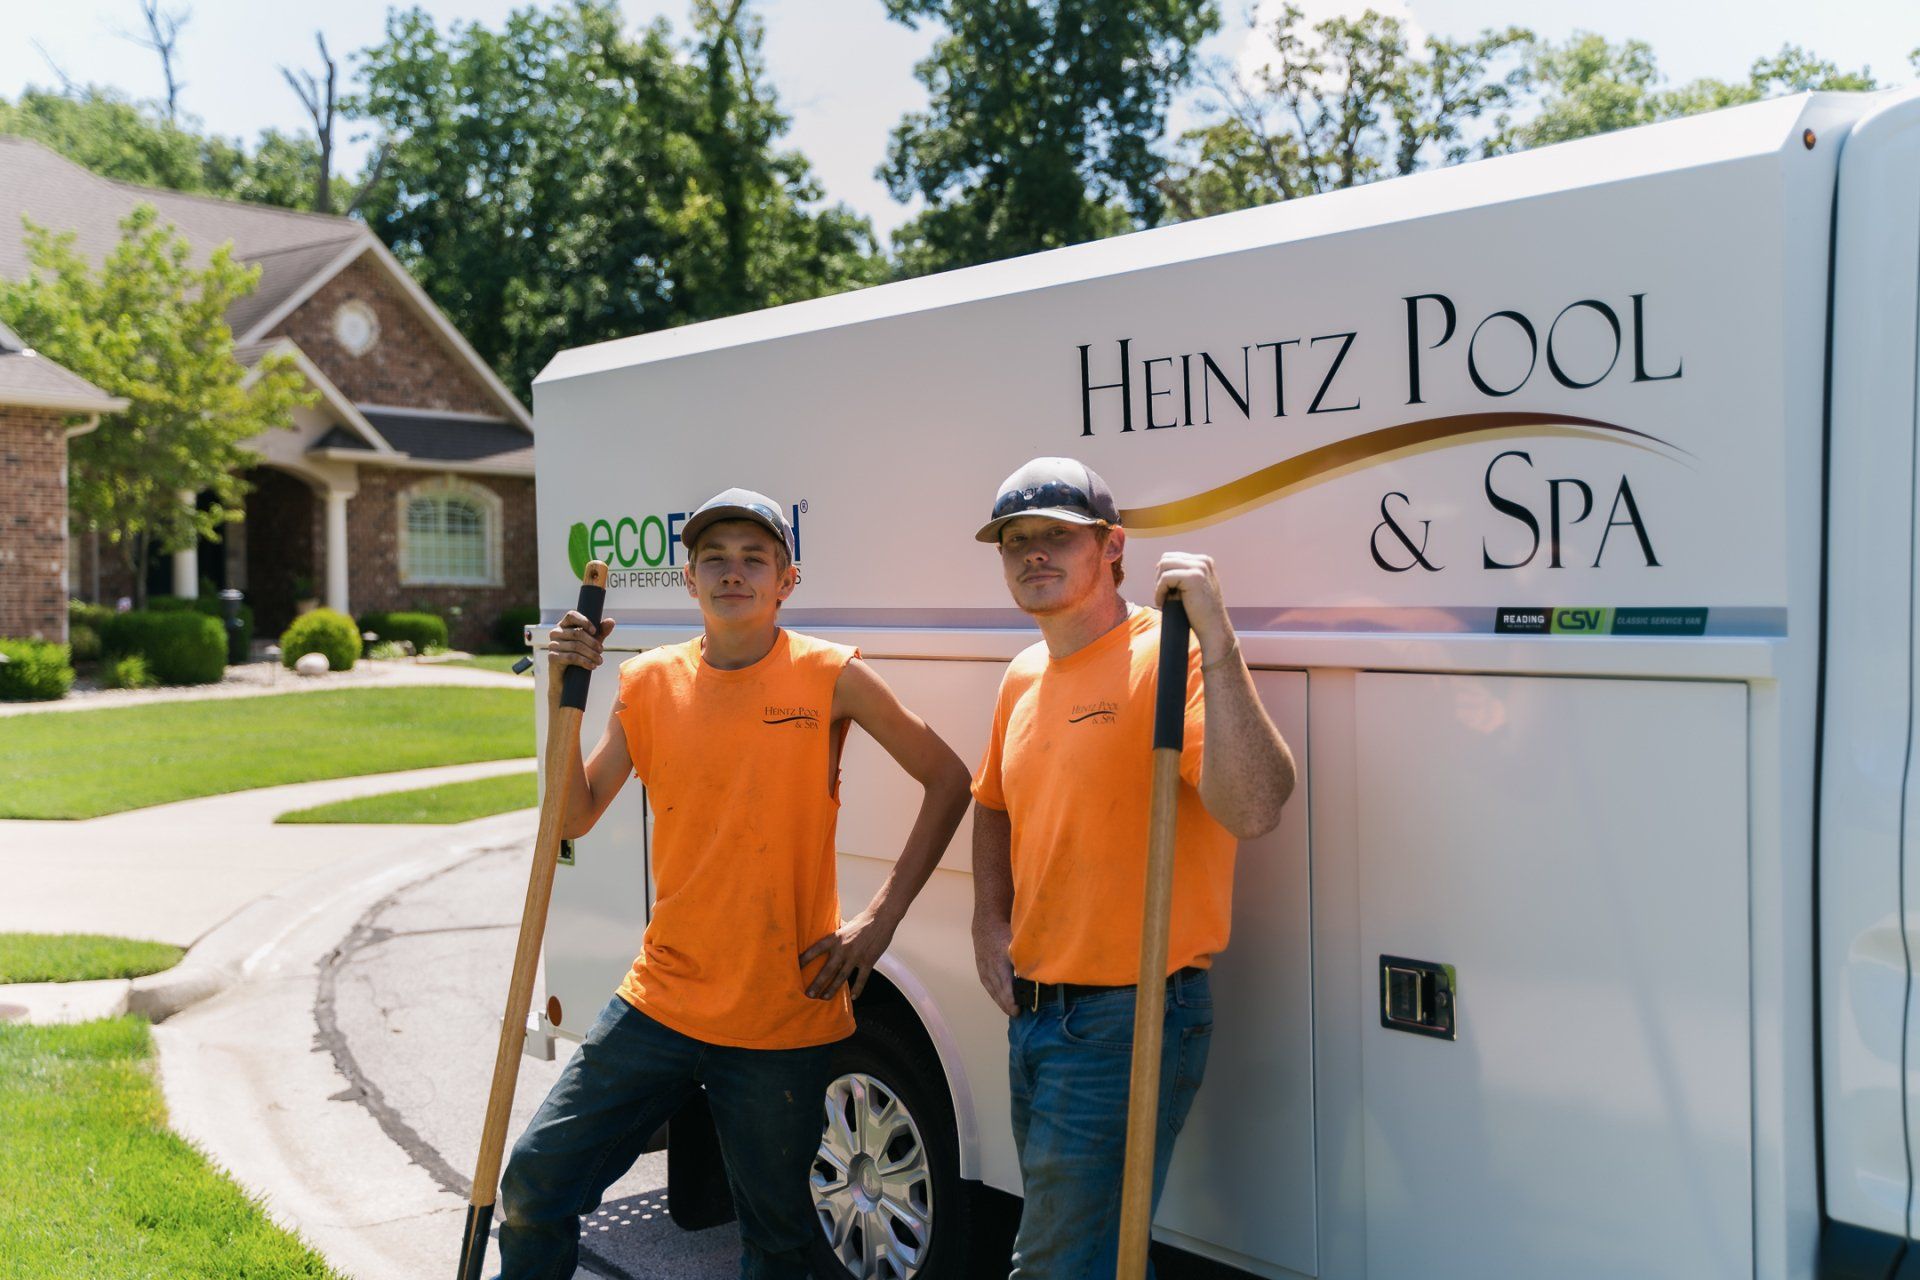 Two team members of Heintz Pool & Spa wearing orange uniform and standing with company truck as background